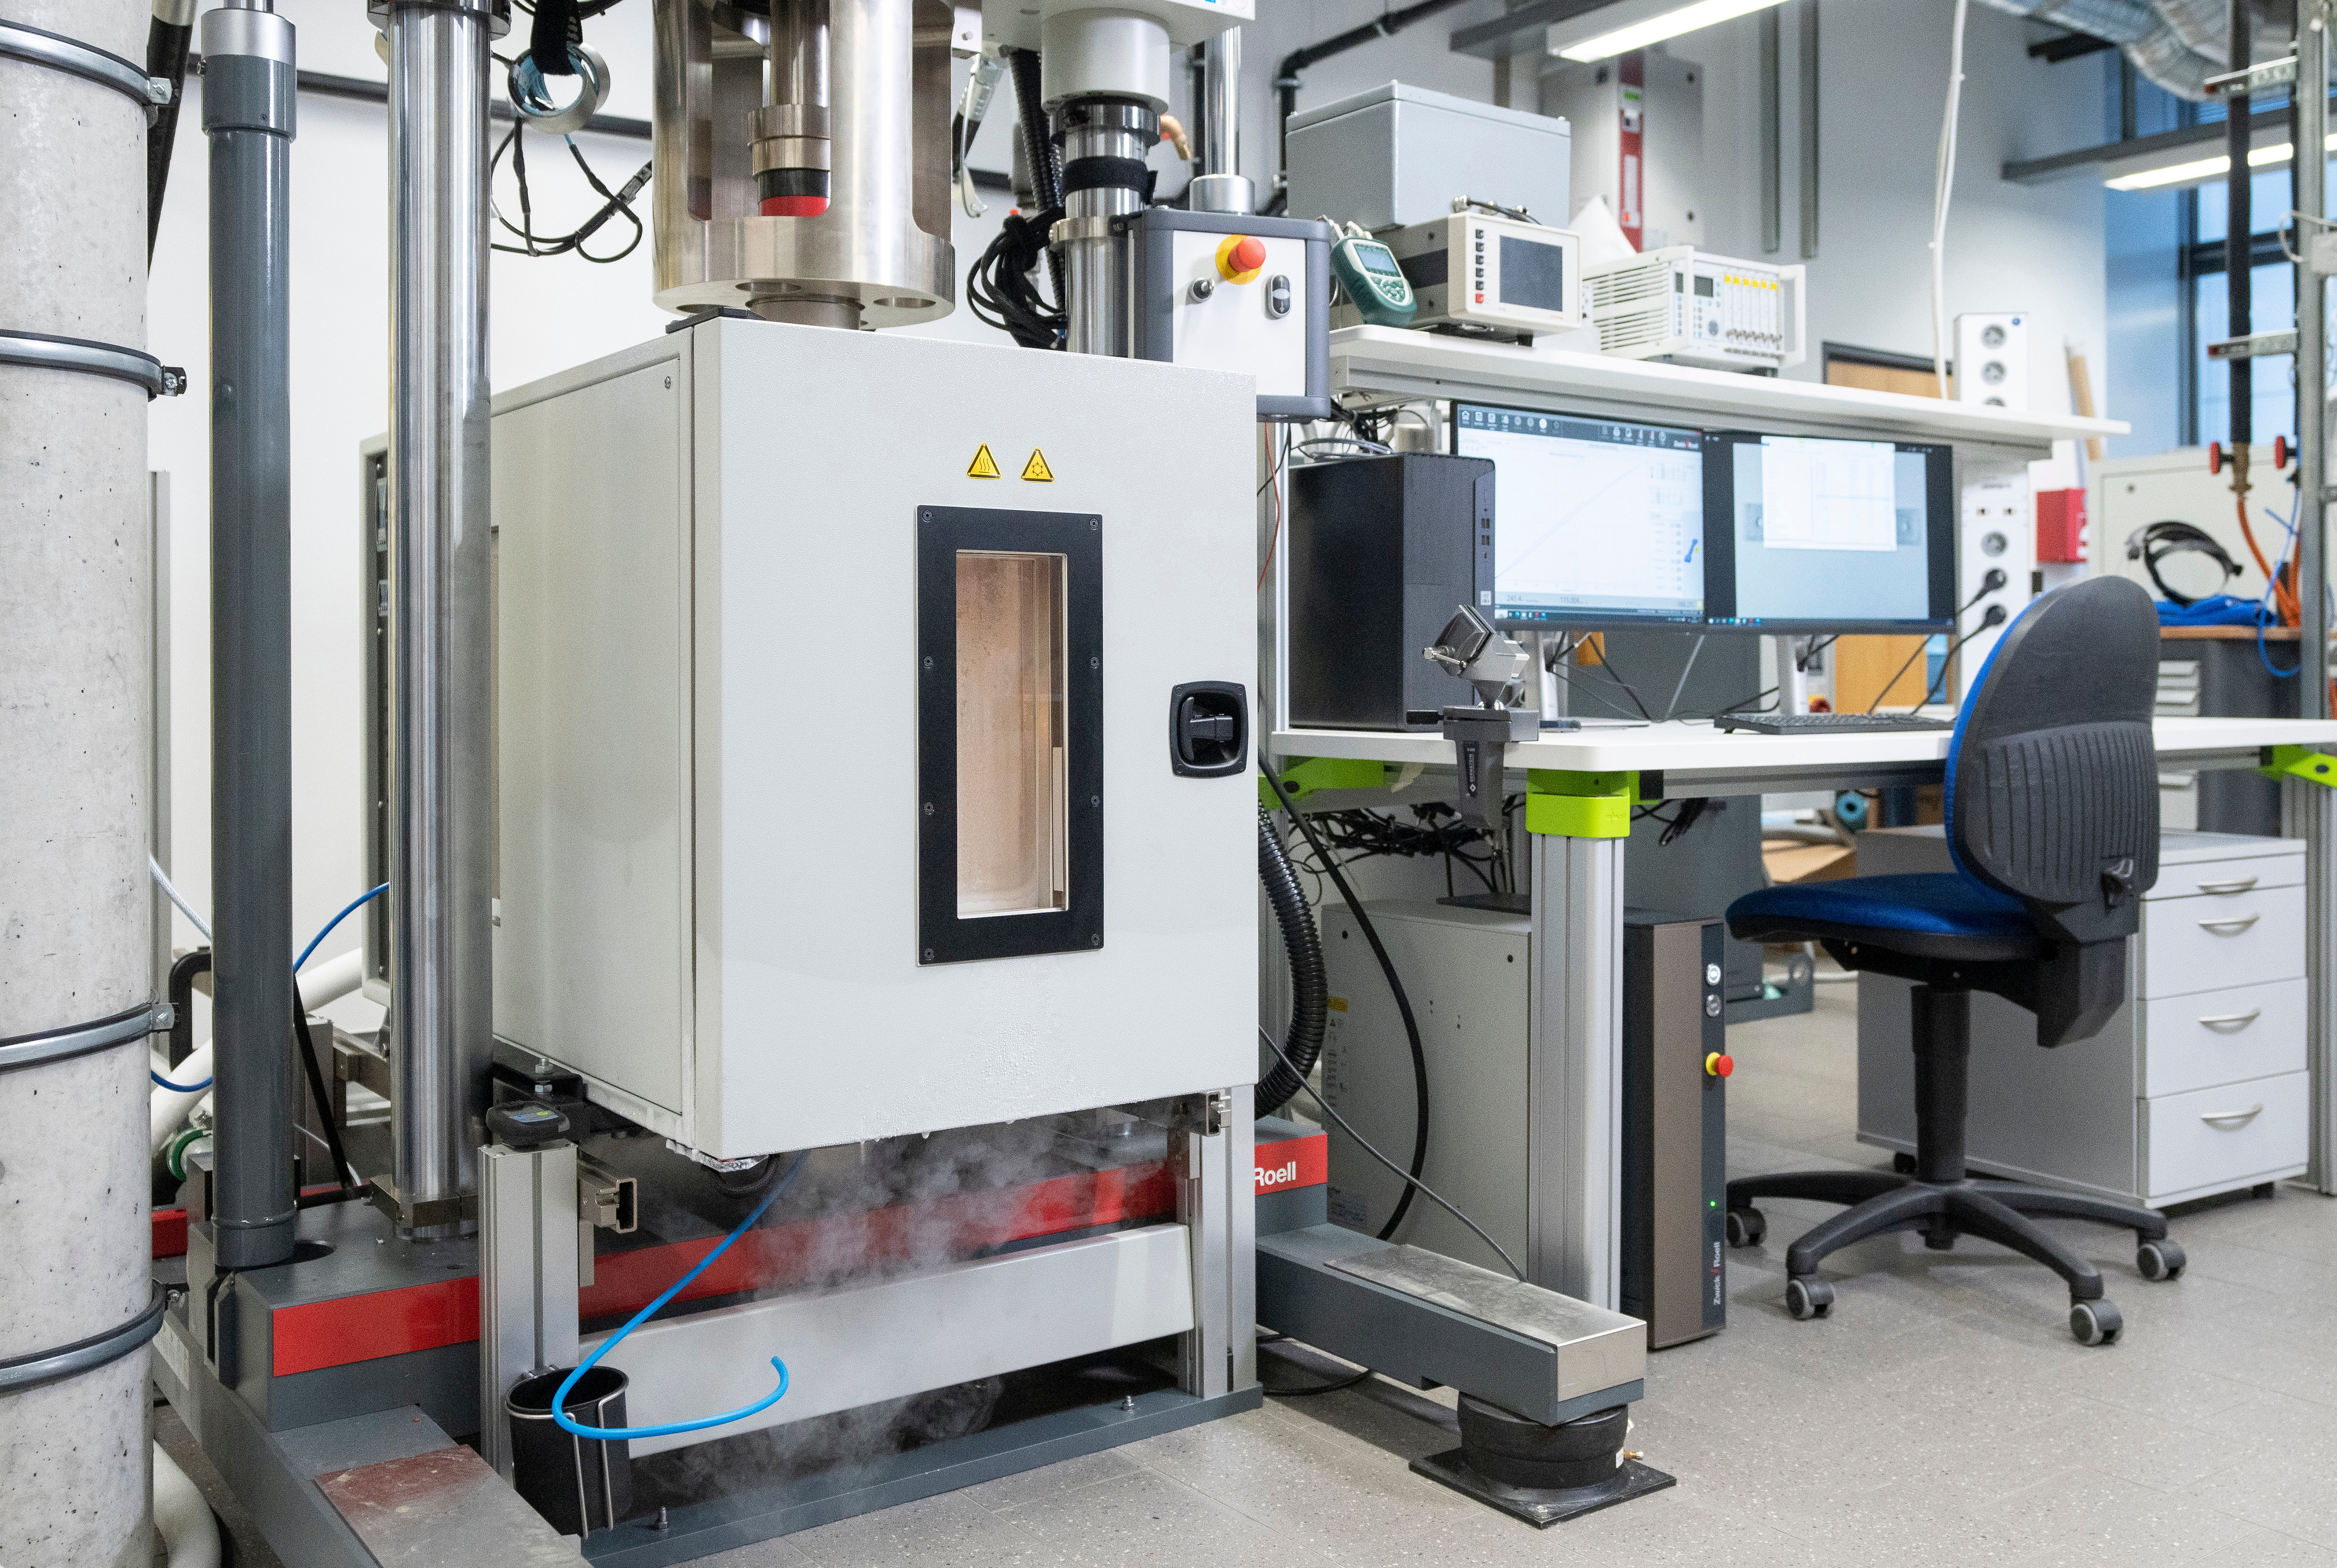 Test setup with climate chamber for material testing of polymers, adhesives, adhesive joints, and fiber composites at cryogenic temperatures as low as -170 °C.